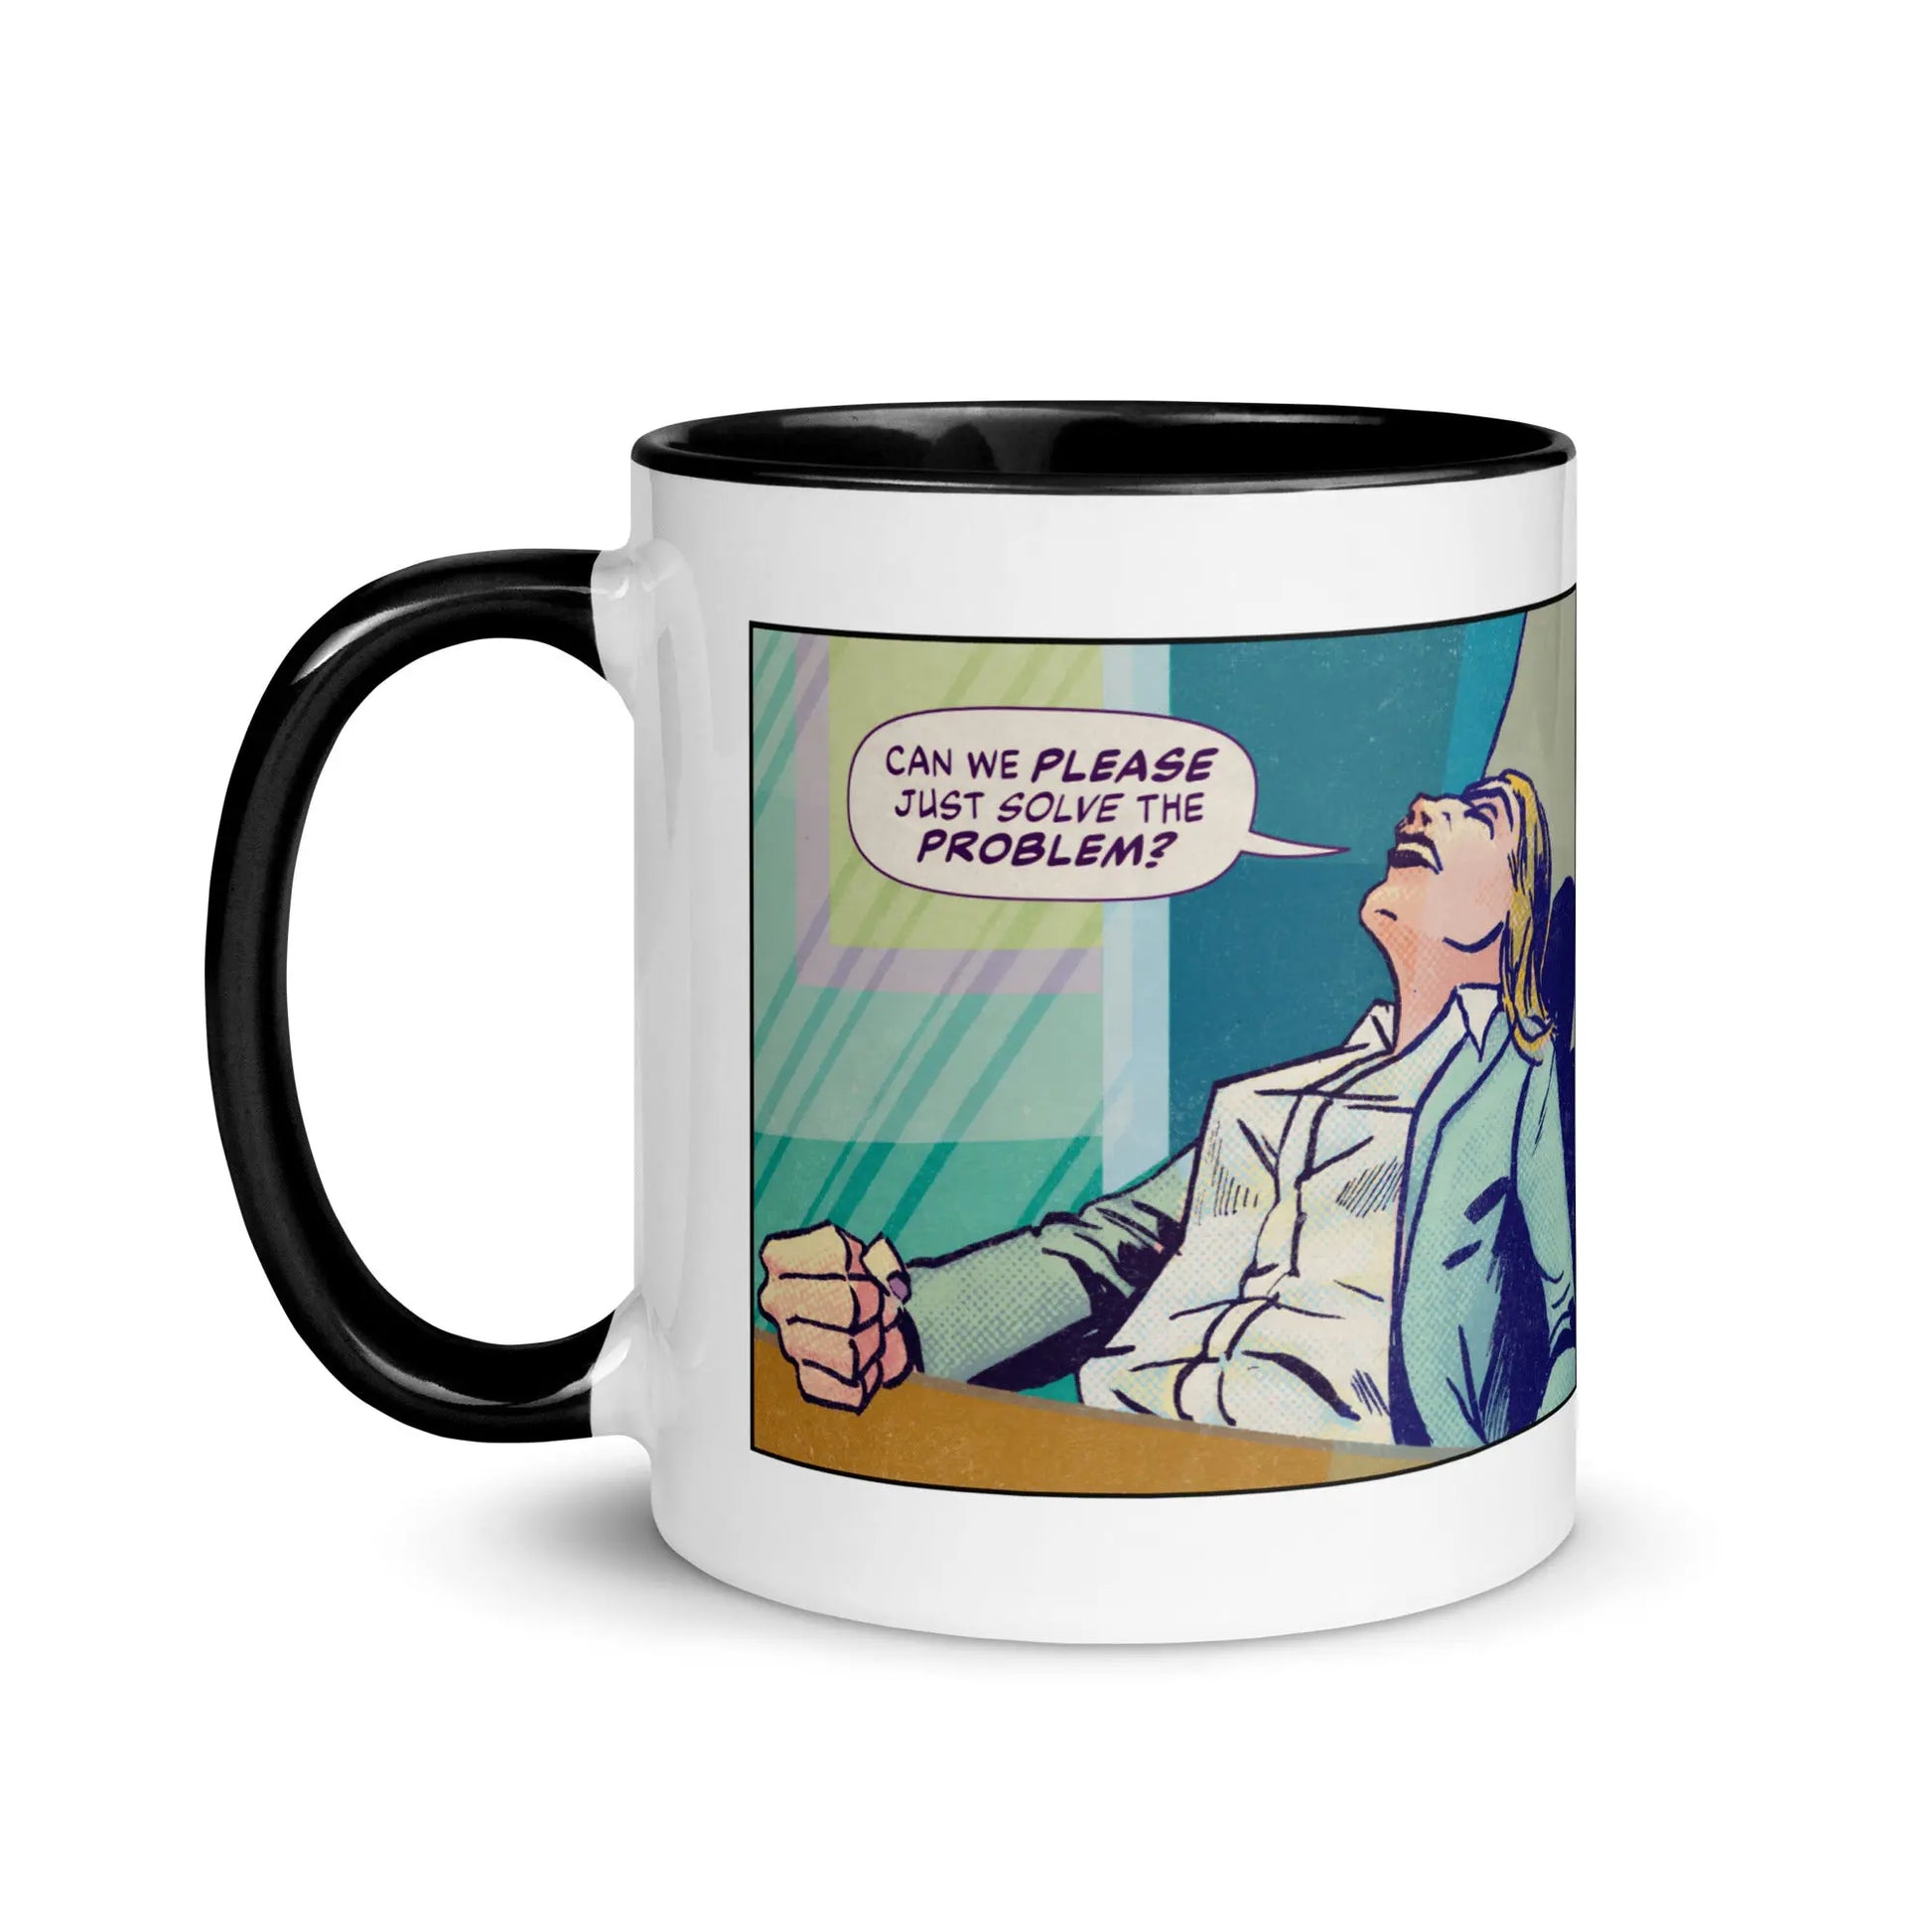 Can We Please Just Solve the Problem? Funny Office Mug SHP Comics